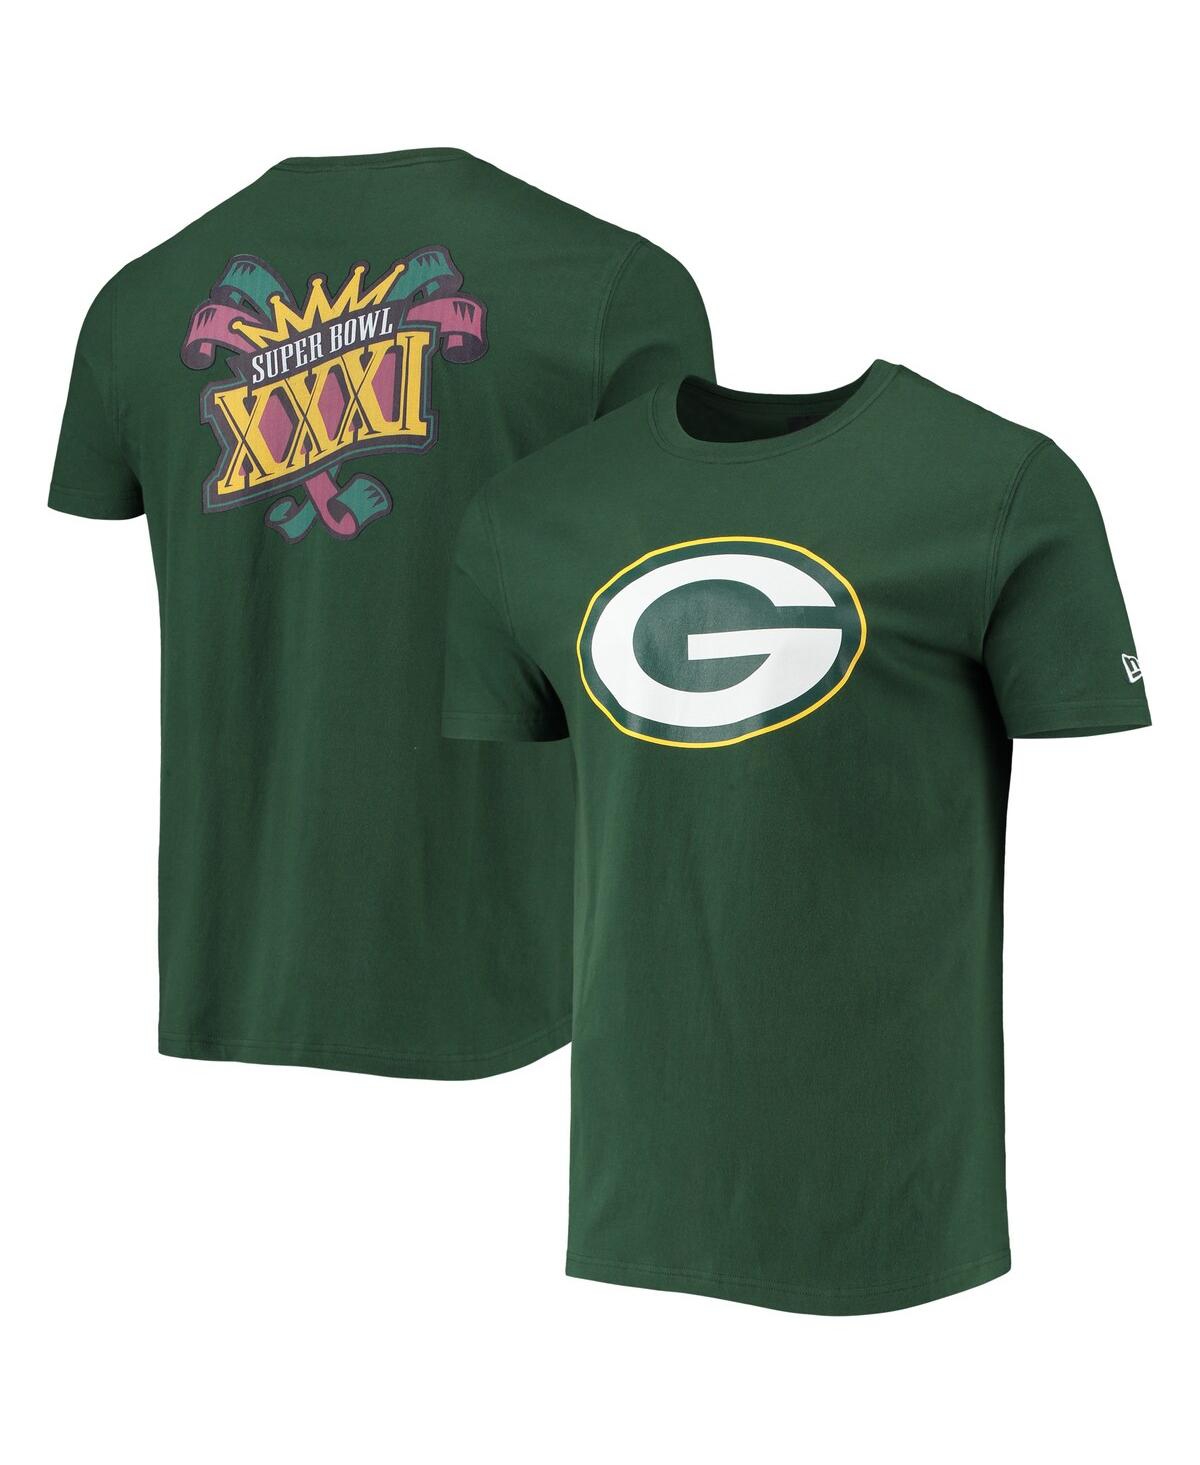 Shop New Era Men's  Green Green Bay Packers Patch Up Collection Super Bowl Xxxi T-shirt